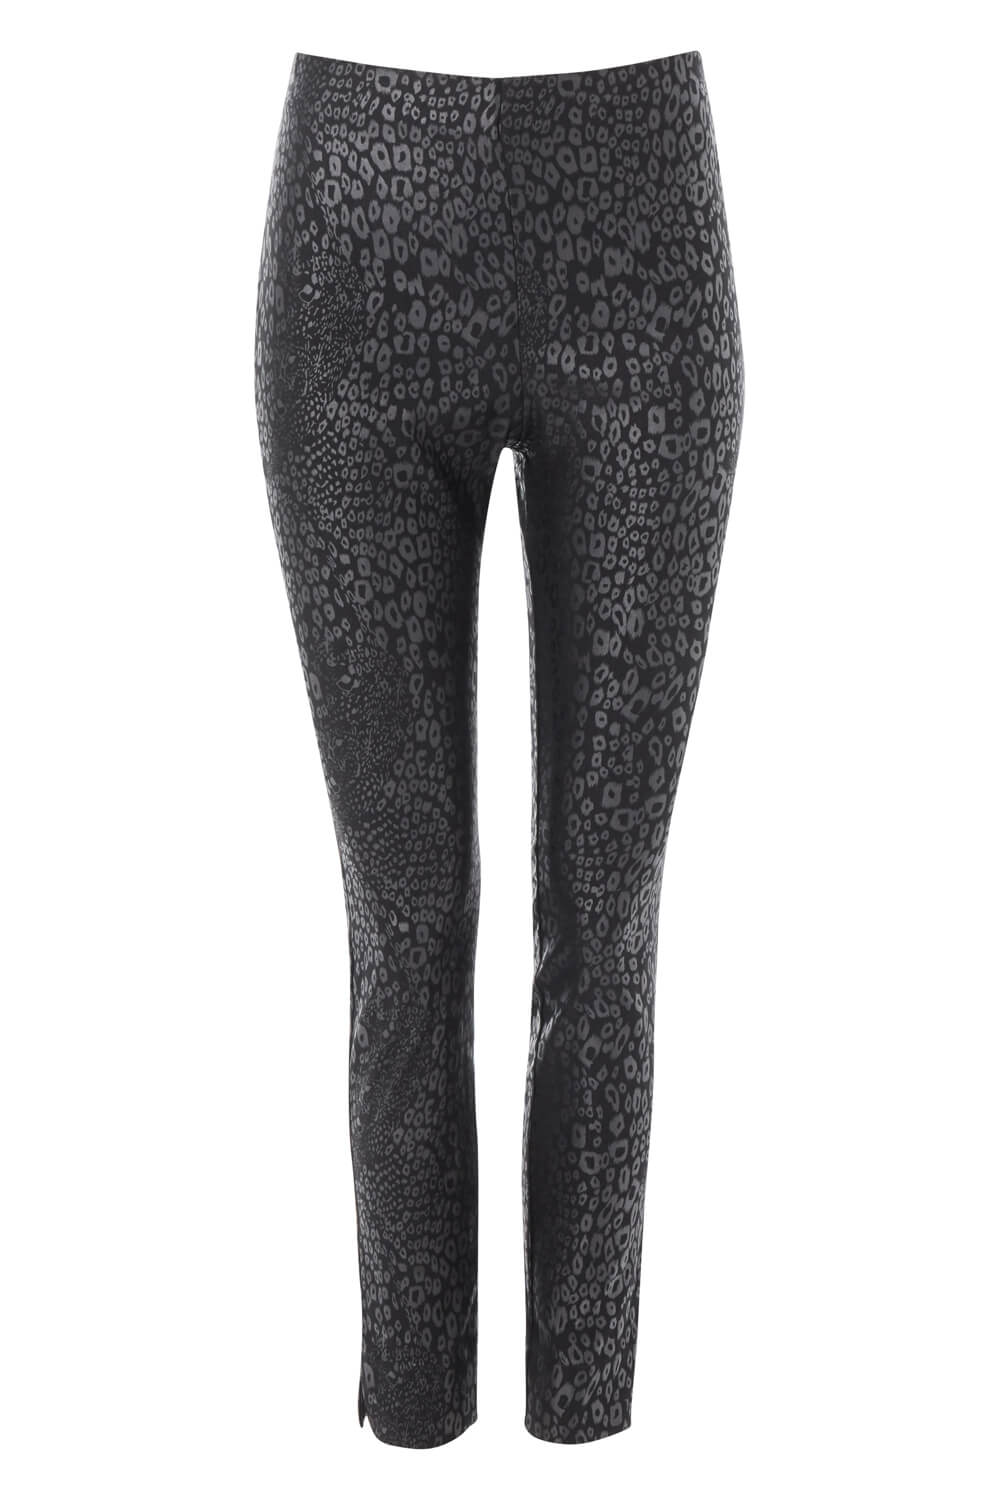 Black Animal Print Full Length Stretch Trousers, Image 4 of 4